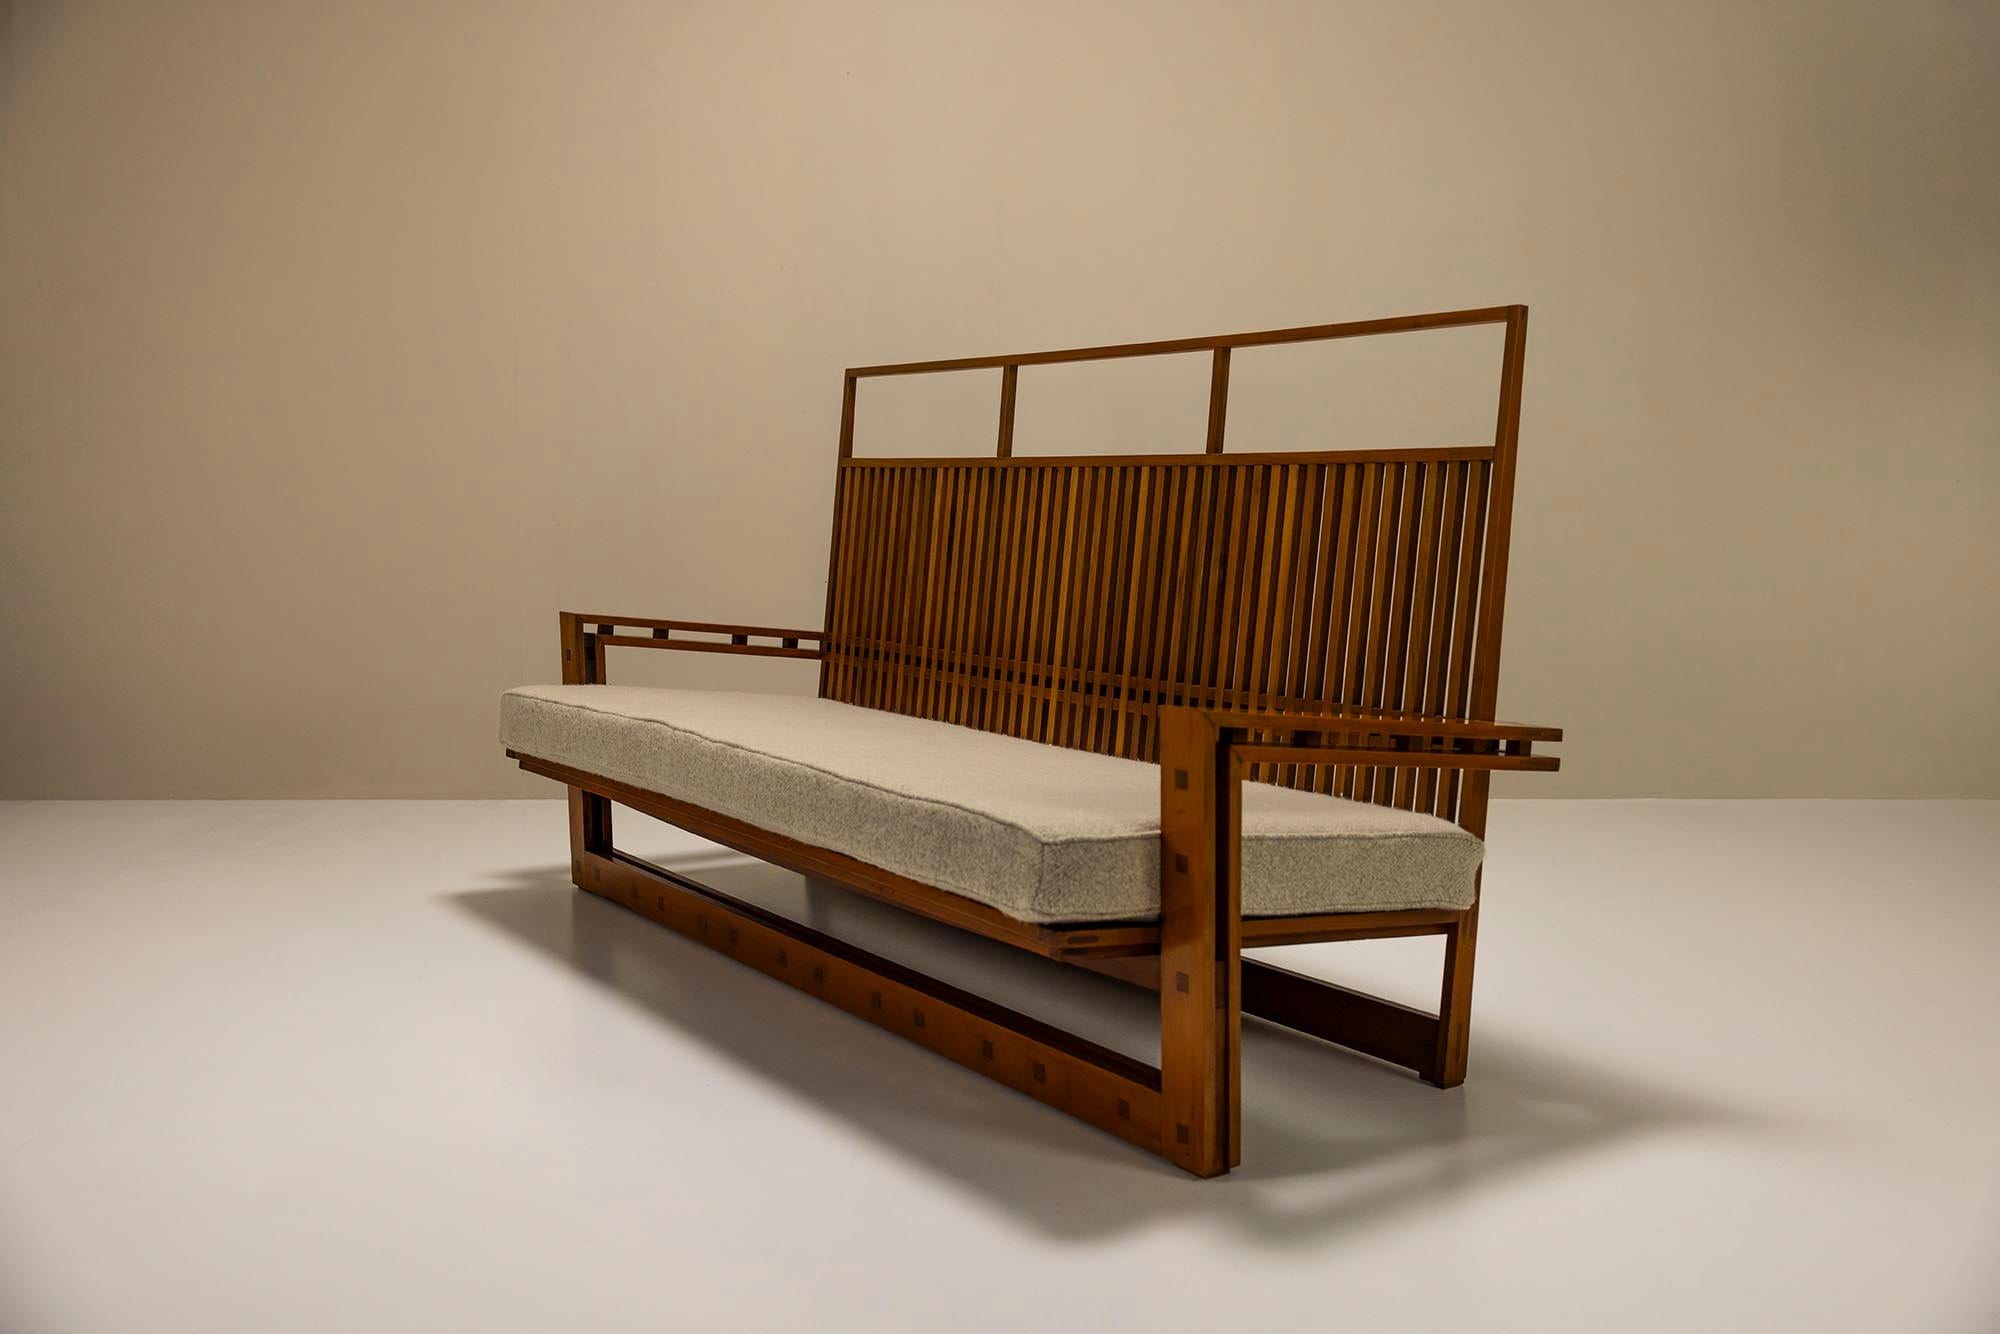 Mid-20th Century Three Seater Sofa In Solid Ash And Mansonia Wood By Fausto Bontempi, Italy 1961 For Sale